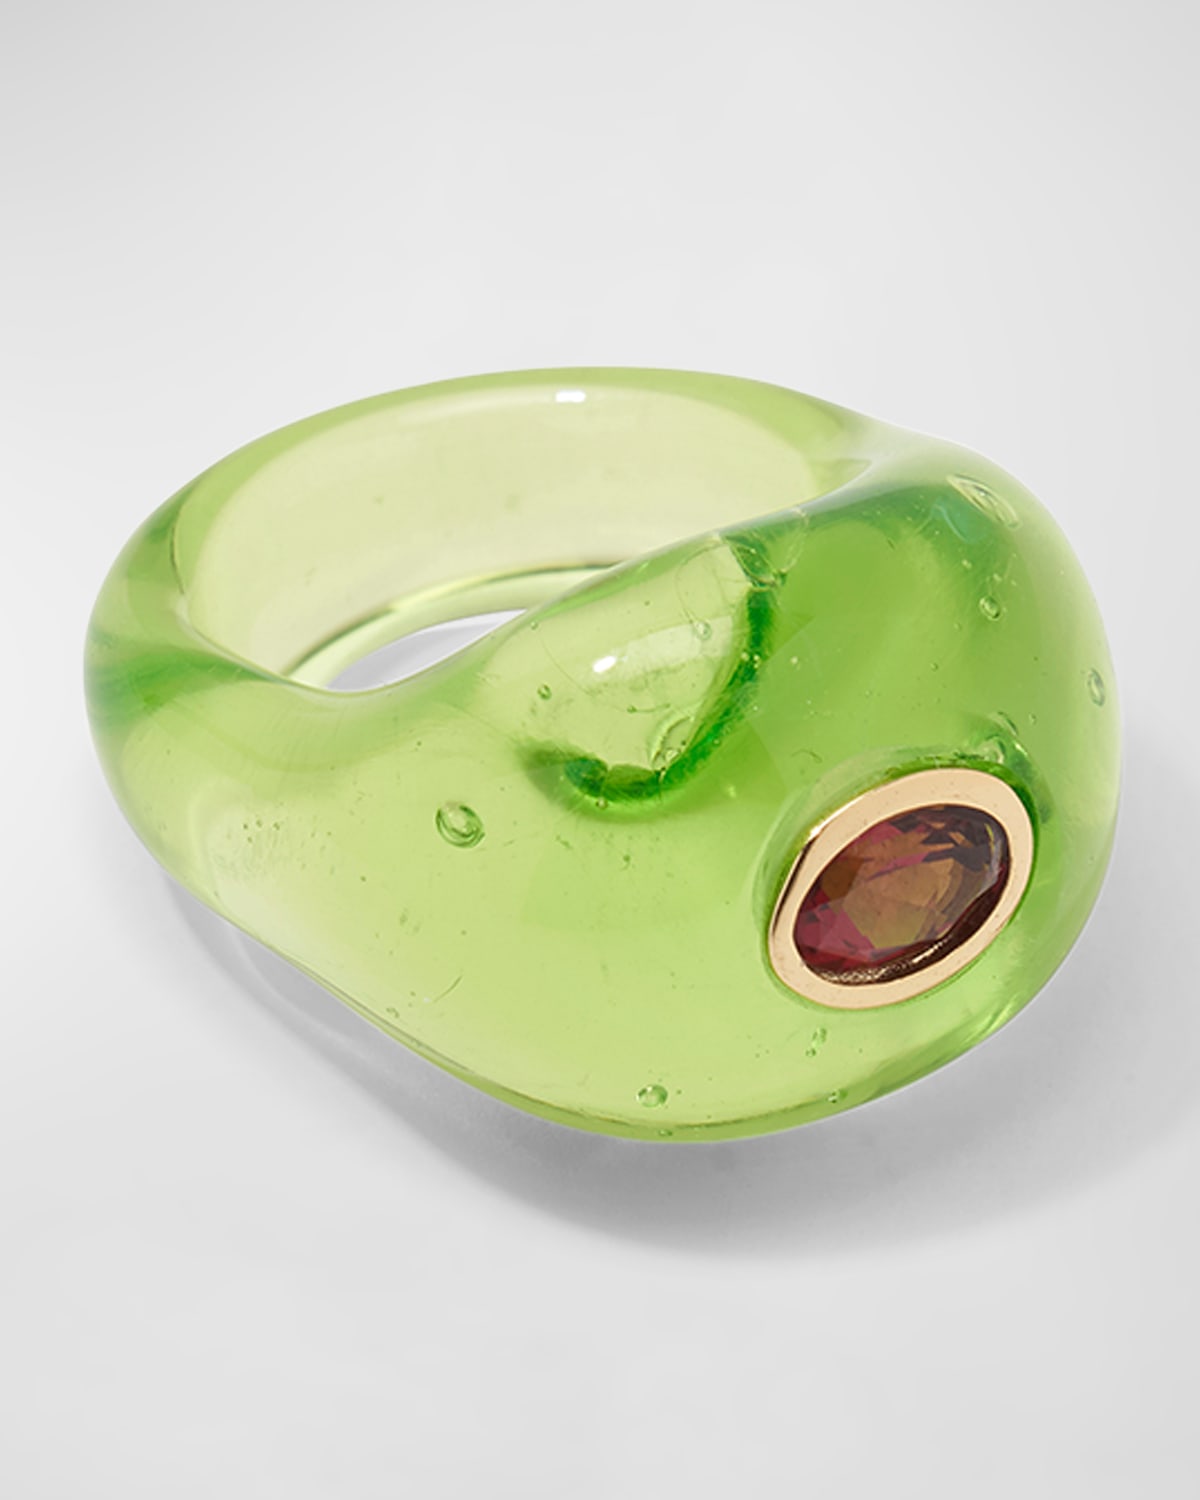 MONUMENT RING IN LIME, SIZE 7